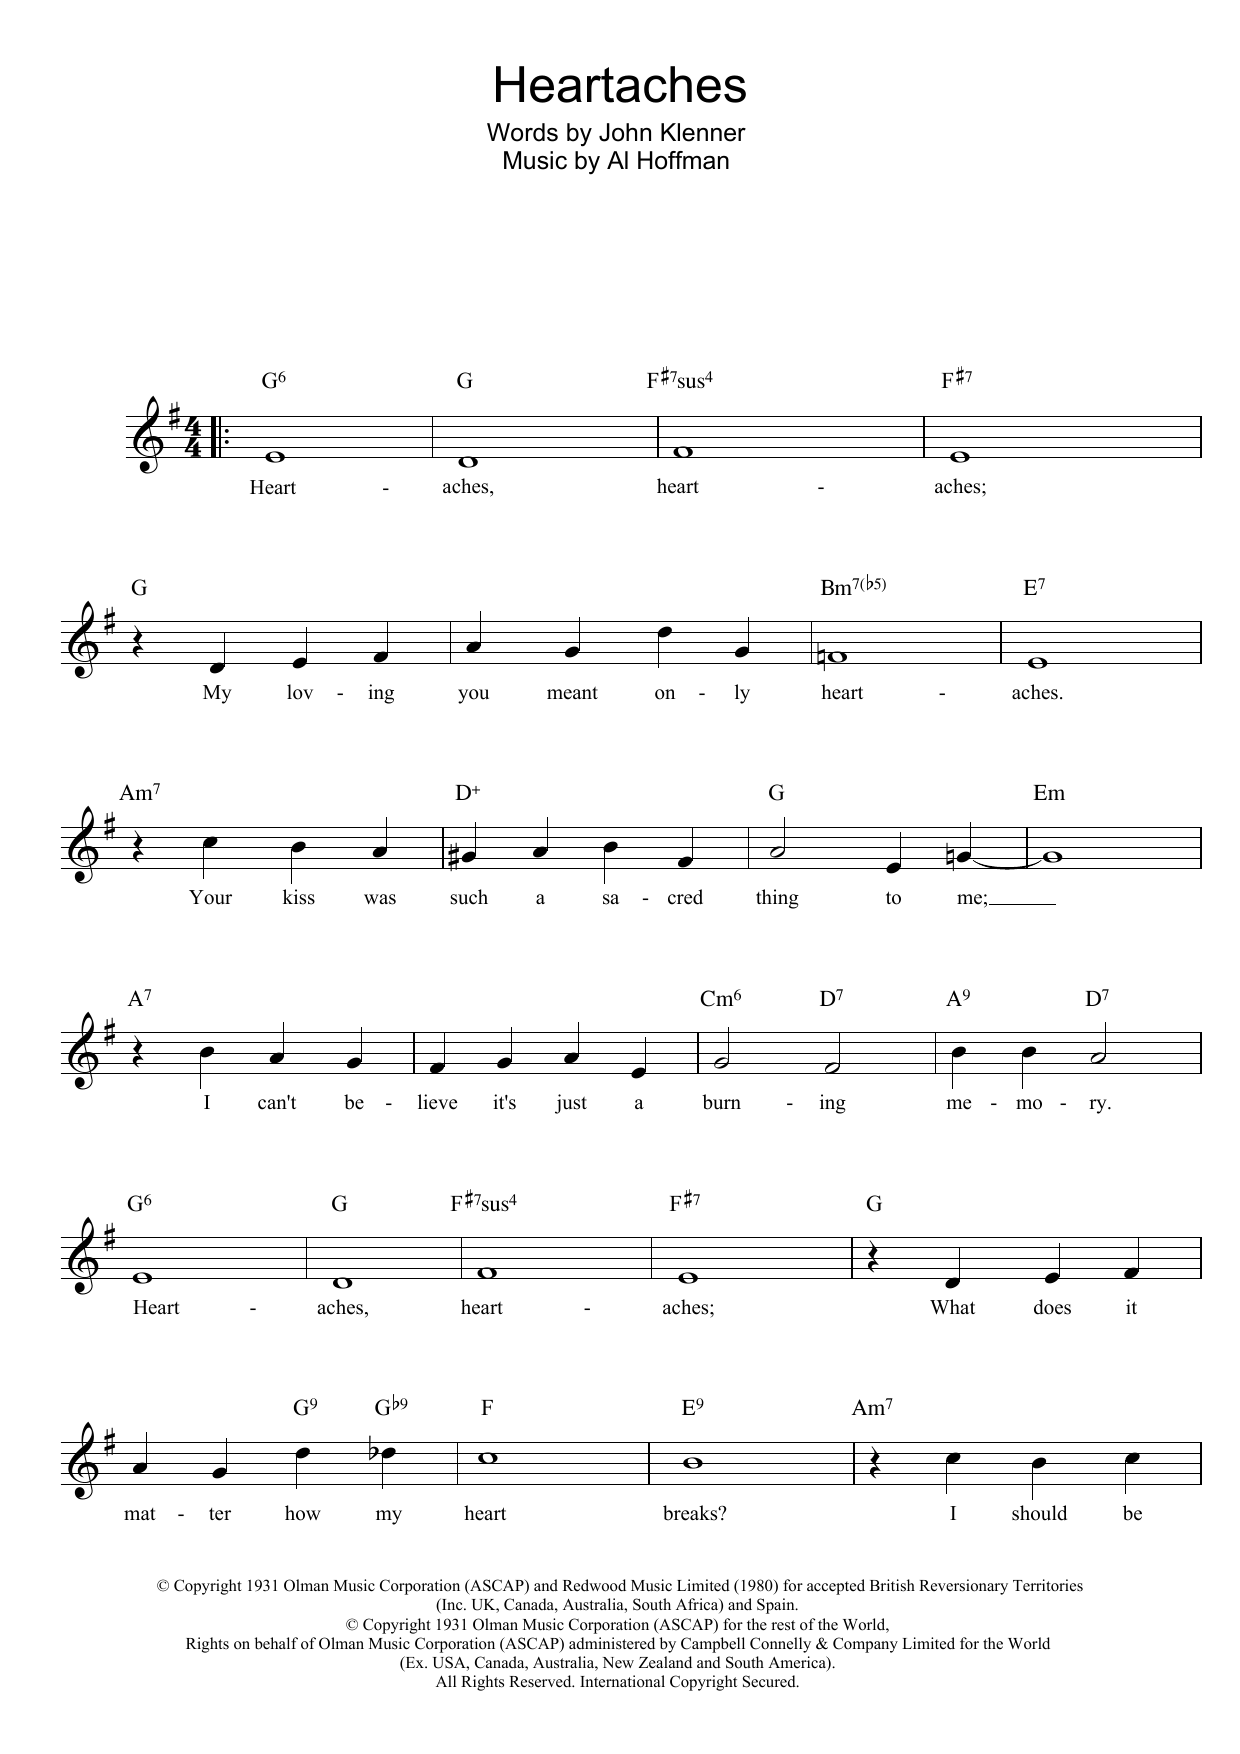 Download Klenner And Hoffman Heartaches Sheet Music